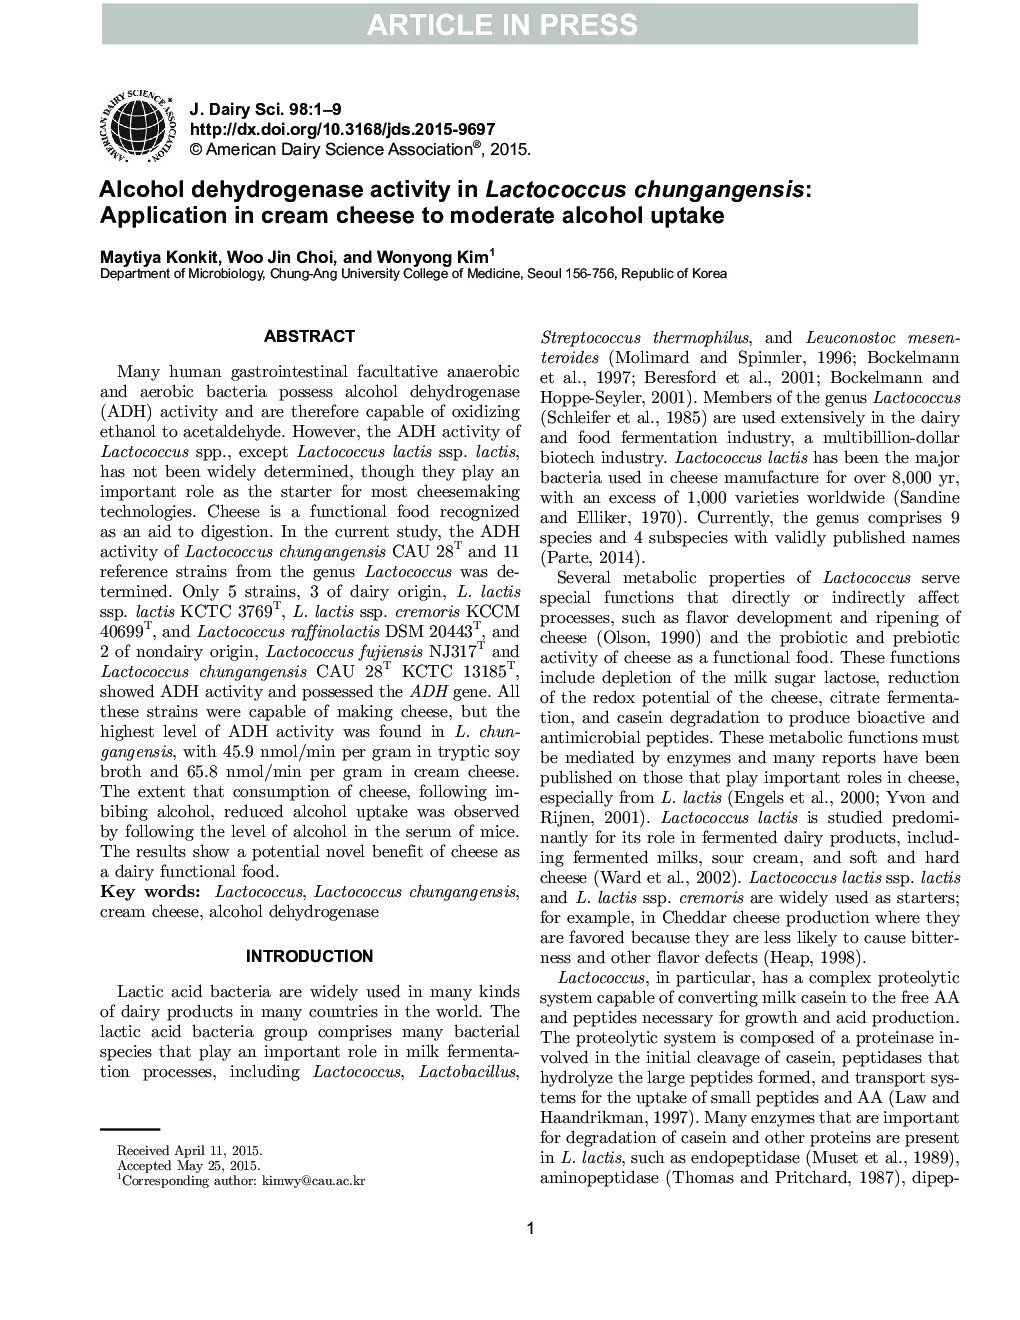 Alcohol dehydrogenase activity in Lactococcus chungangensis: Application in cream cheese to moderate alcohol uptake